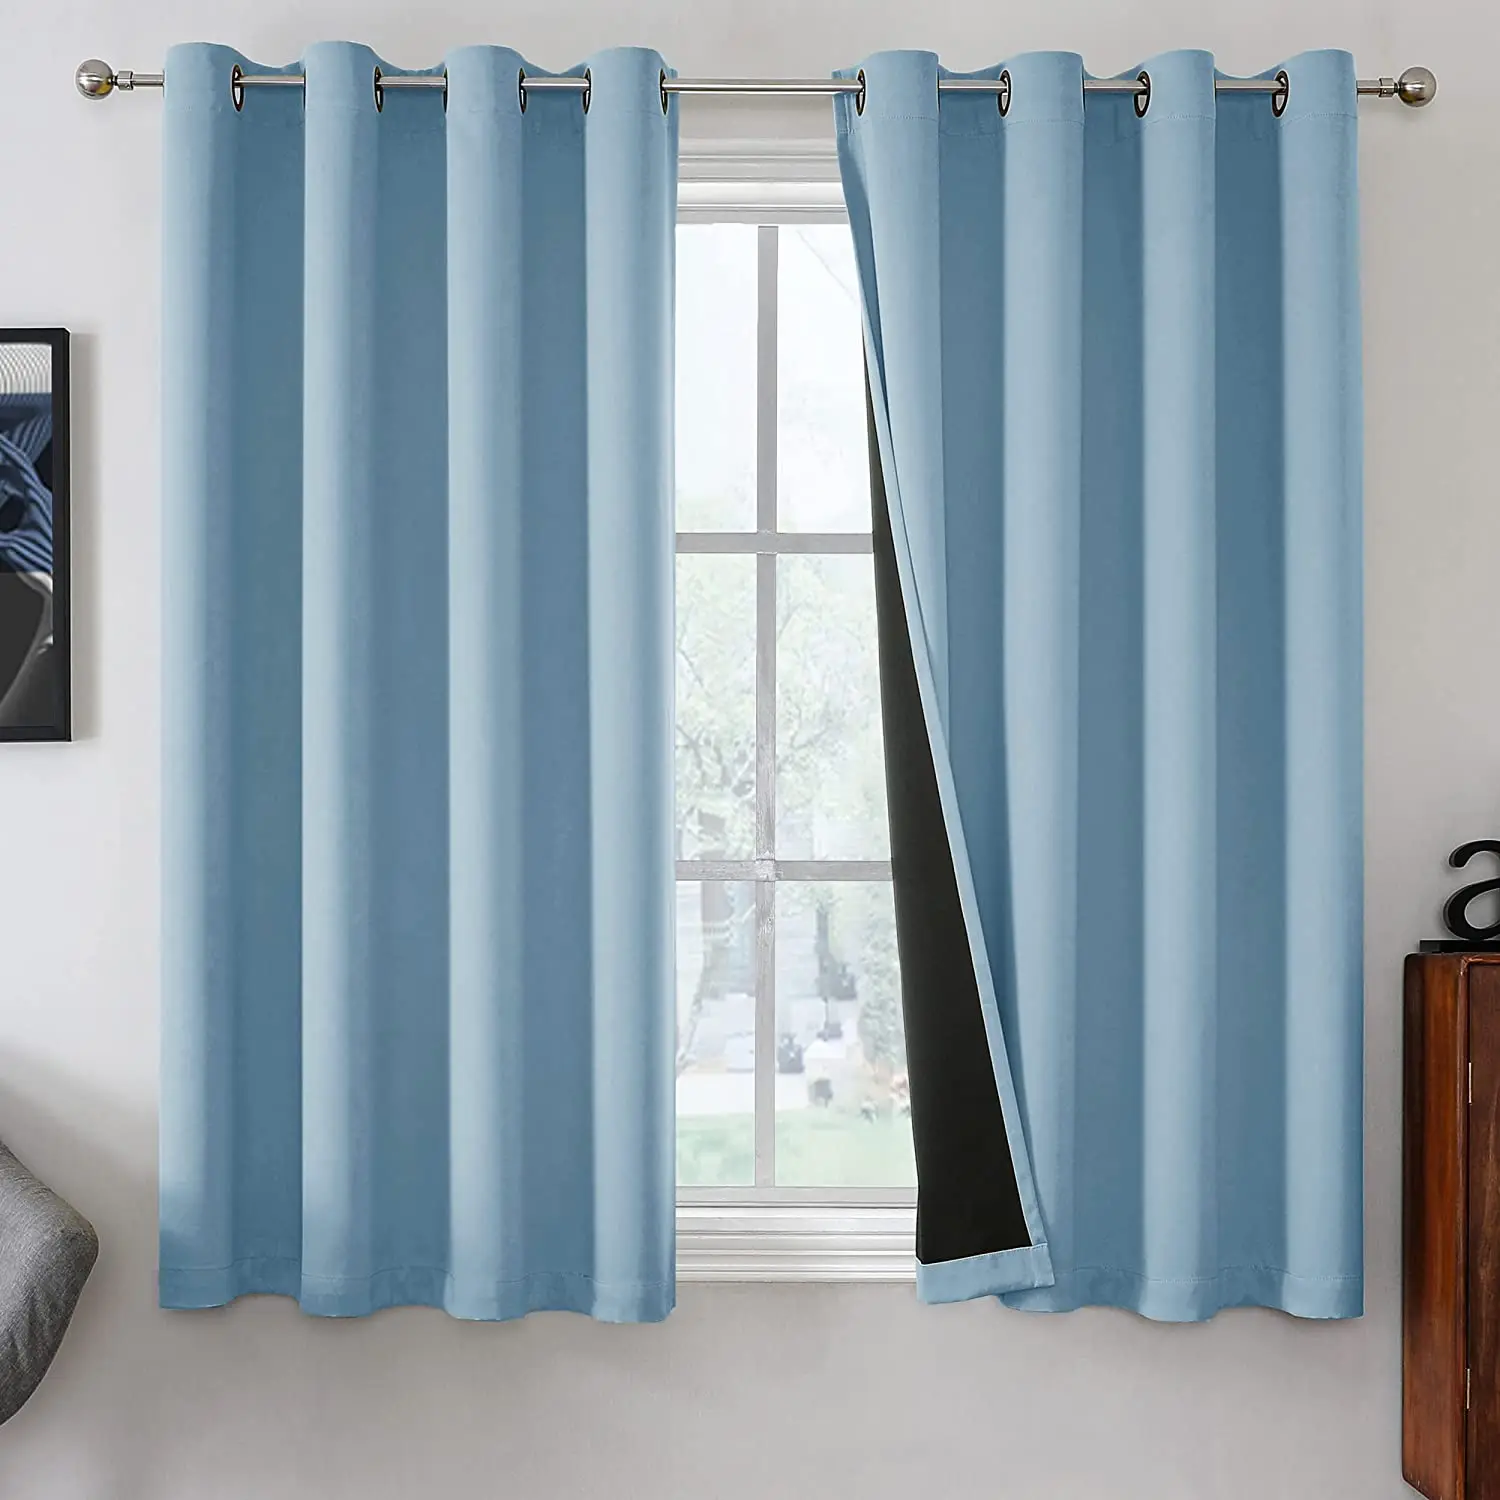 Curtains for the living room luxury Blackout Curtain Panels , Heat and Full Light Blocking Drapes with Grommets curtains (11000003393035)